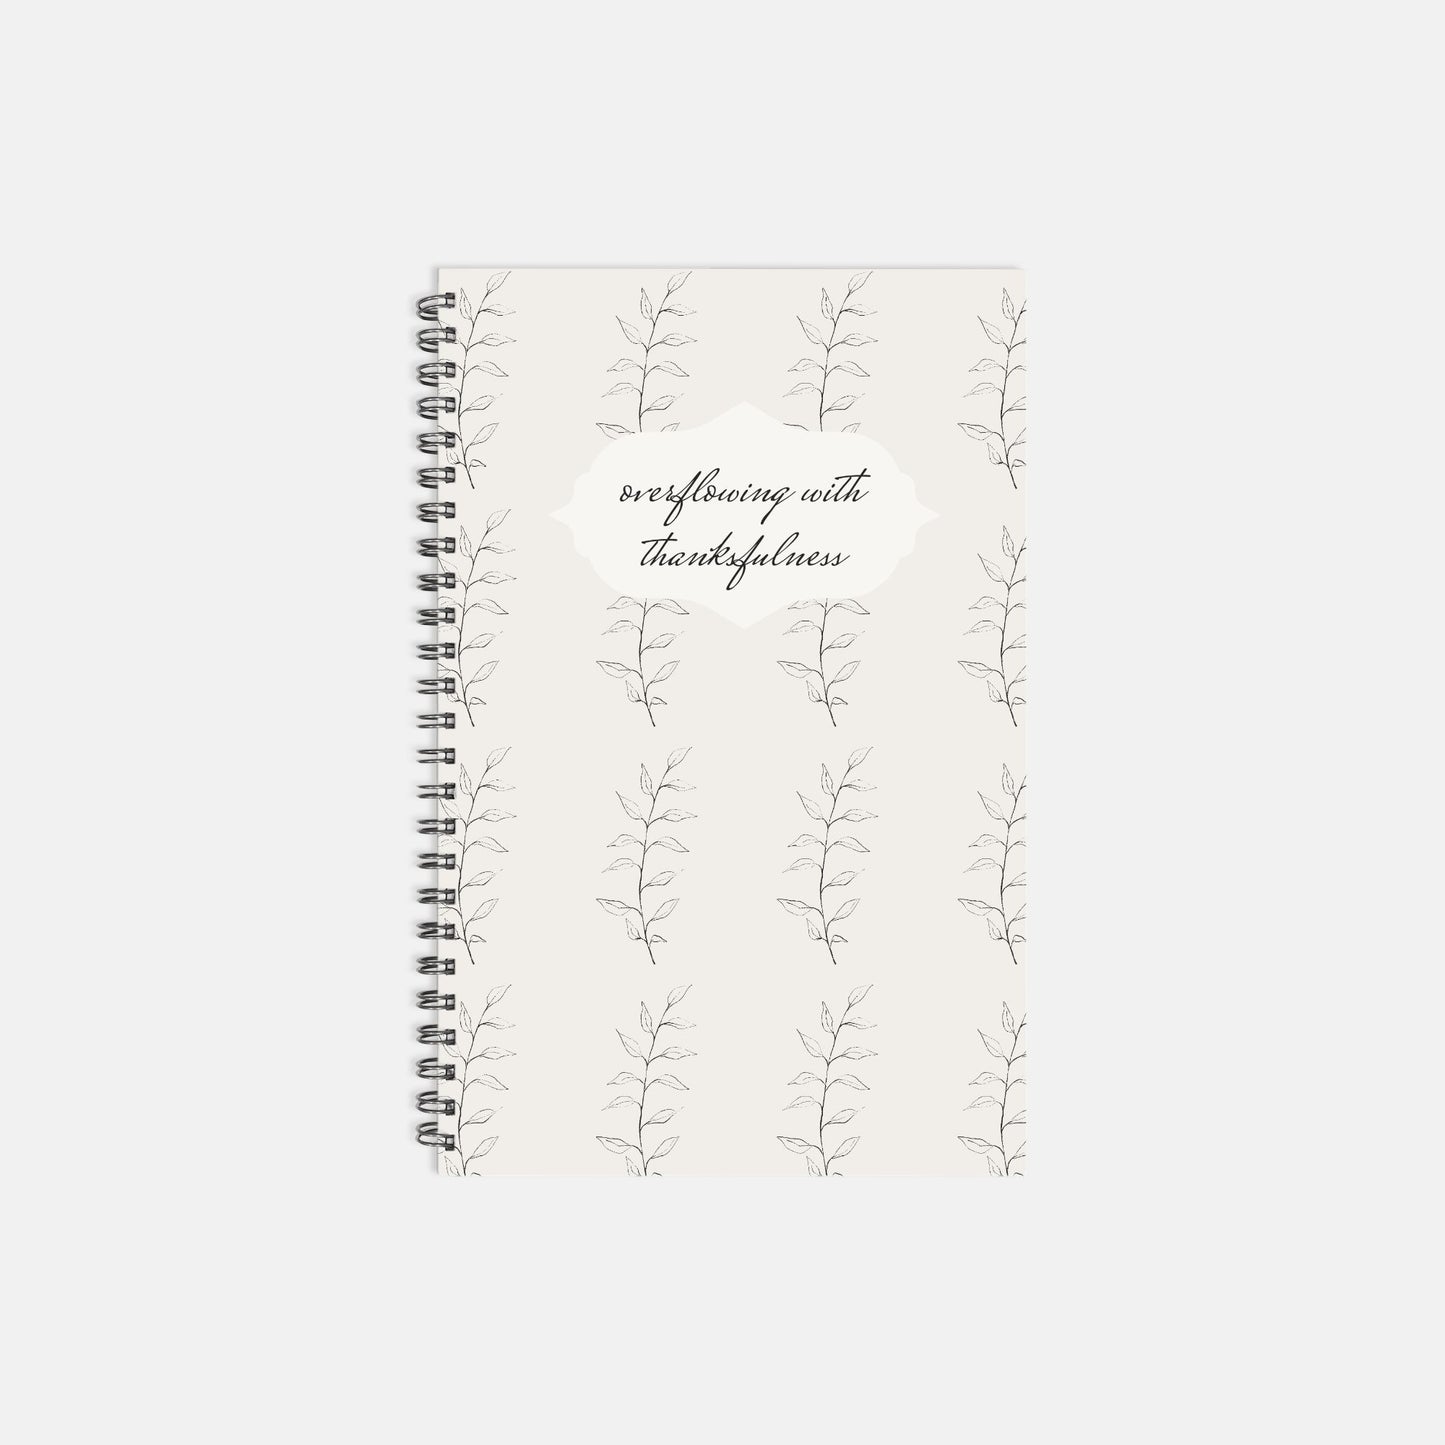 Overflowing with Thankfulness Notebook Hardcover Spiral 5.5 x 8.5